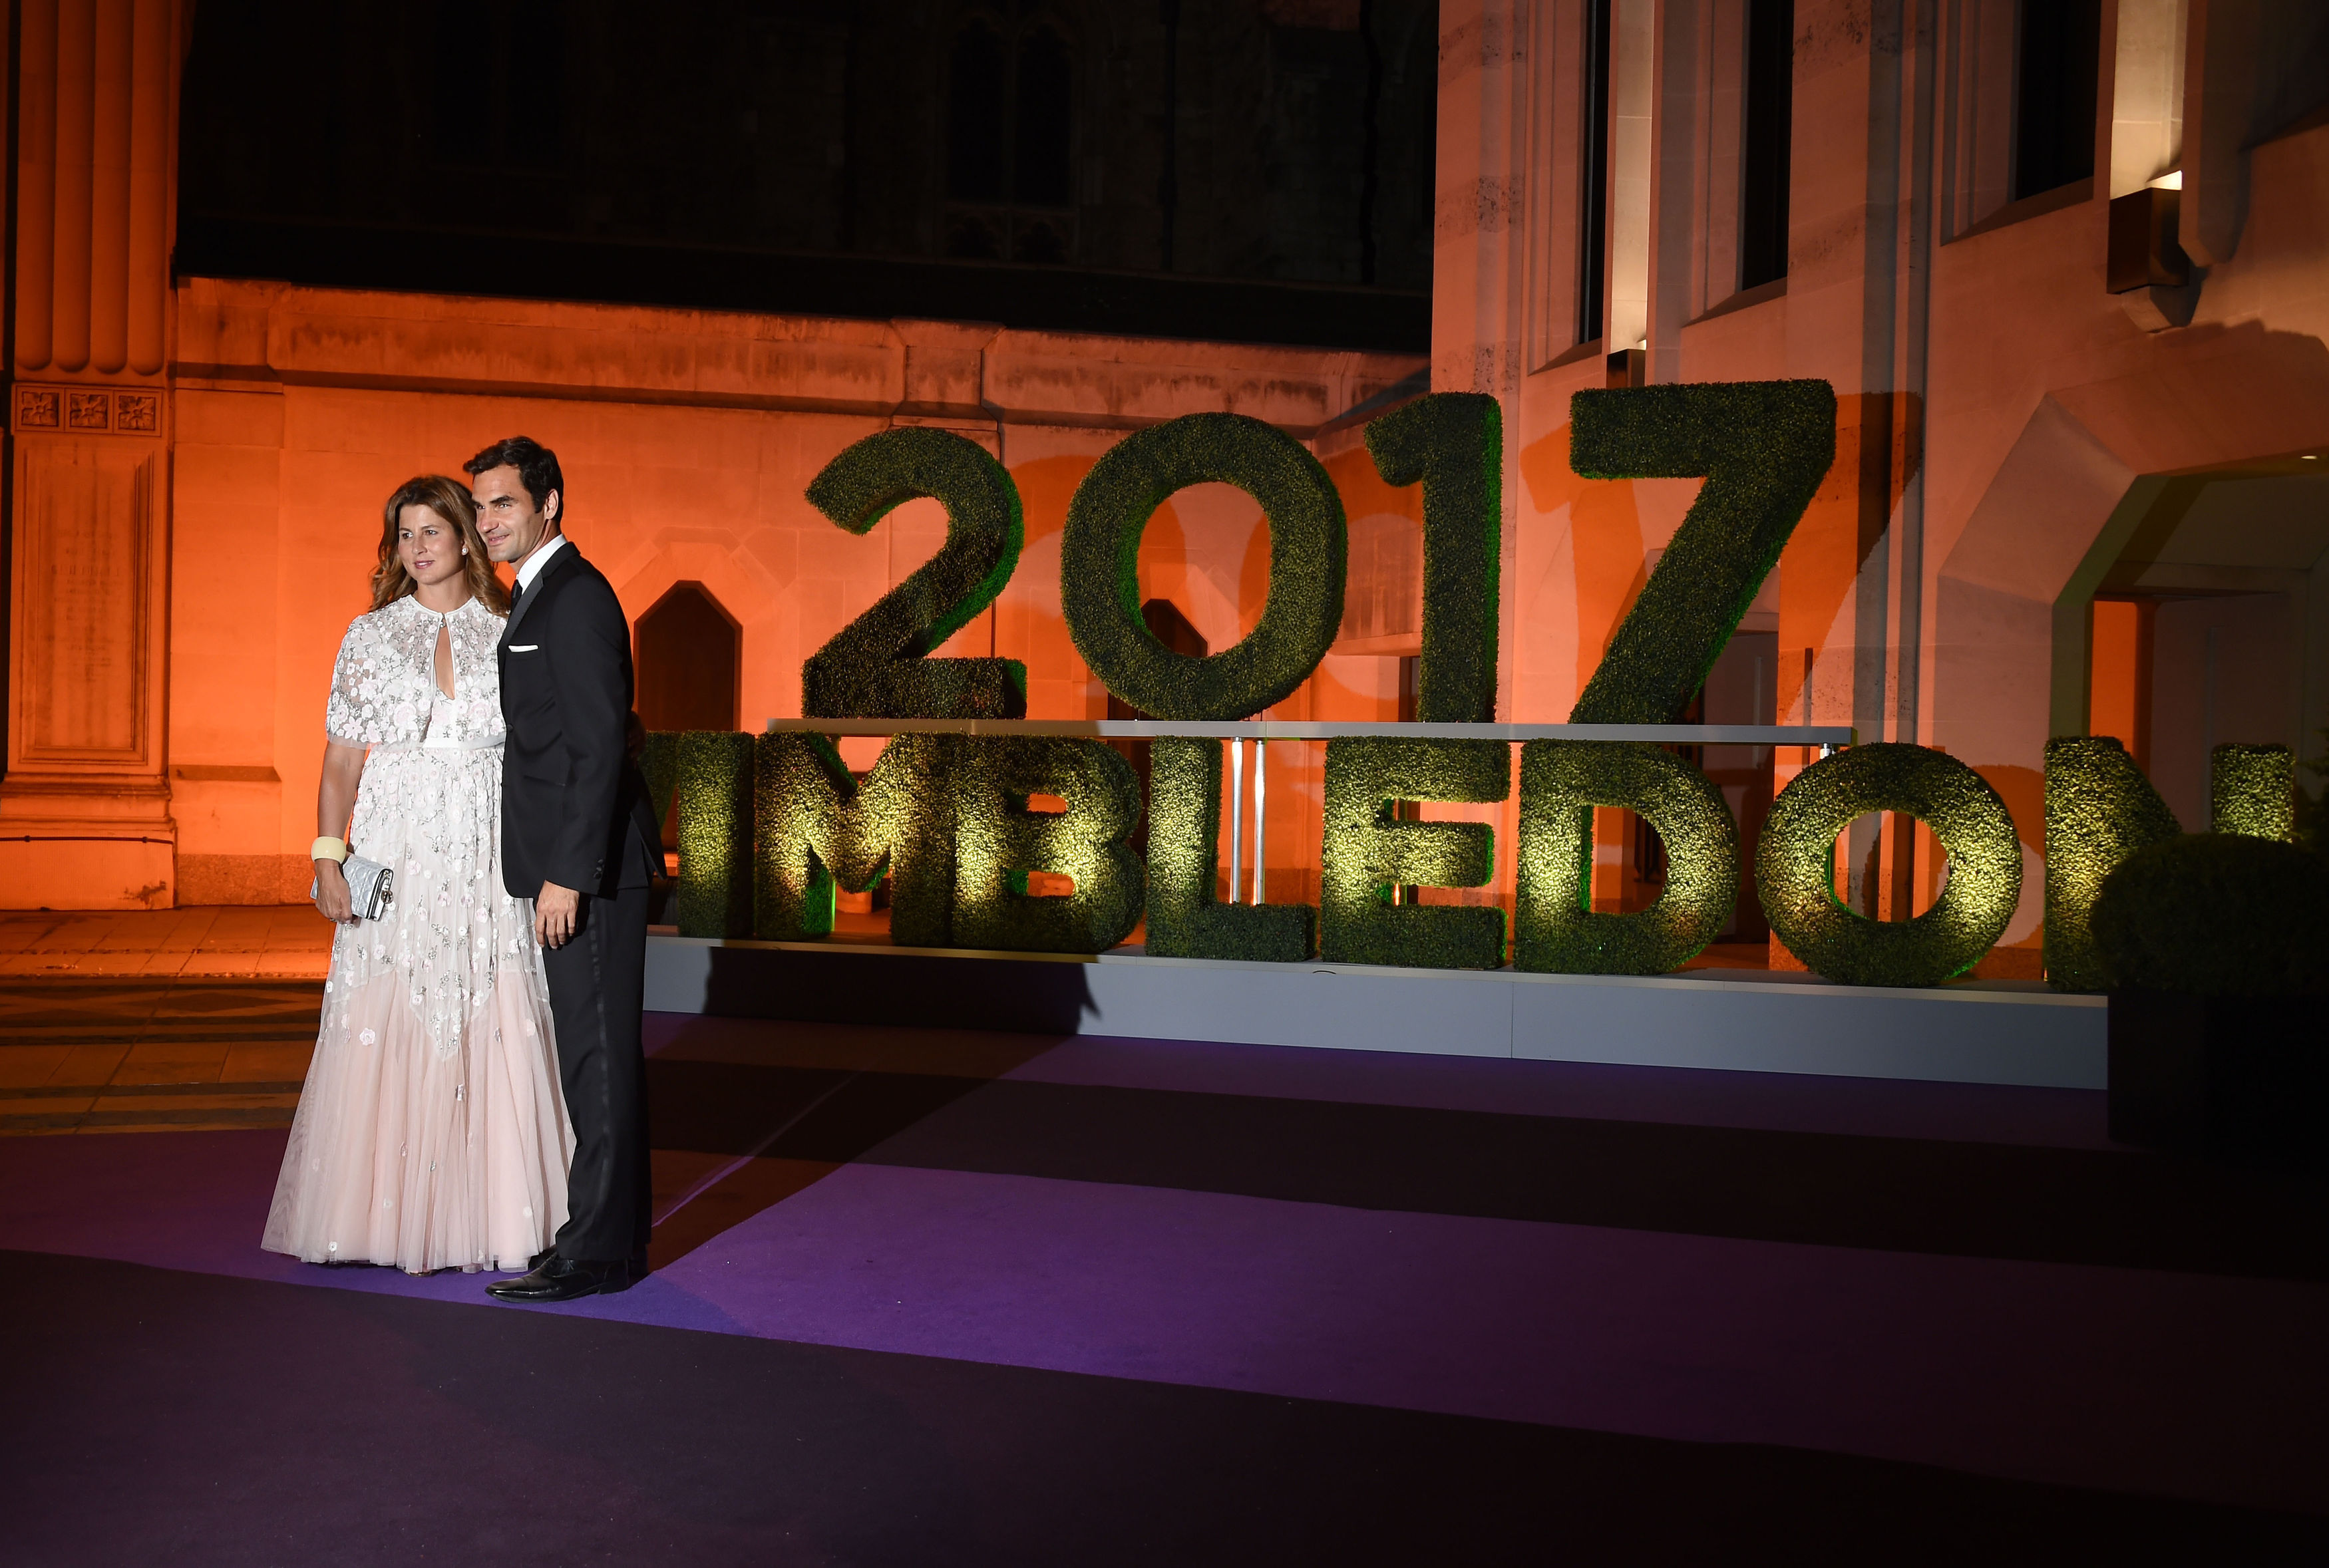 Roger and Mirka Federer arriving at the Wimbledon Champions Dinner 2017, at the Guildhall, London.